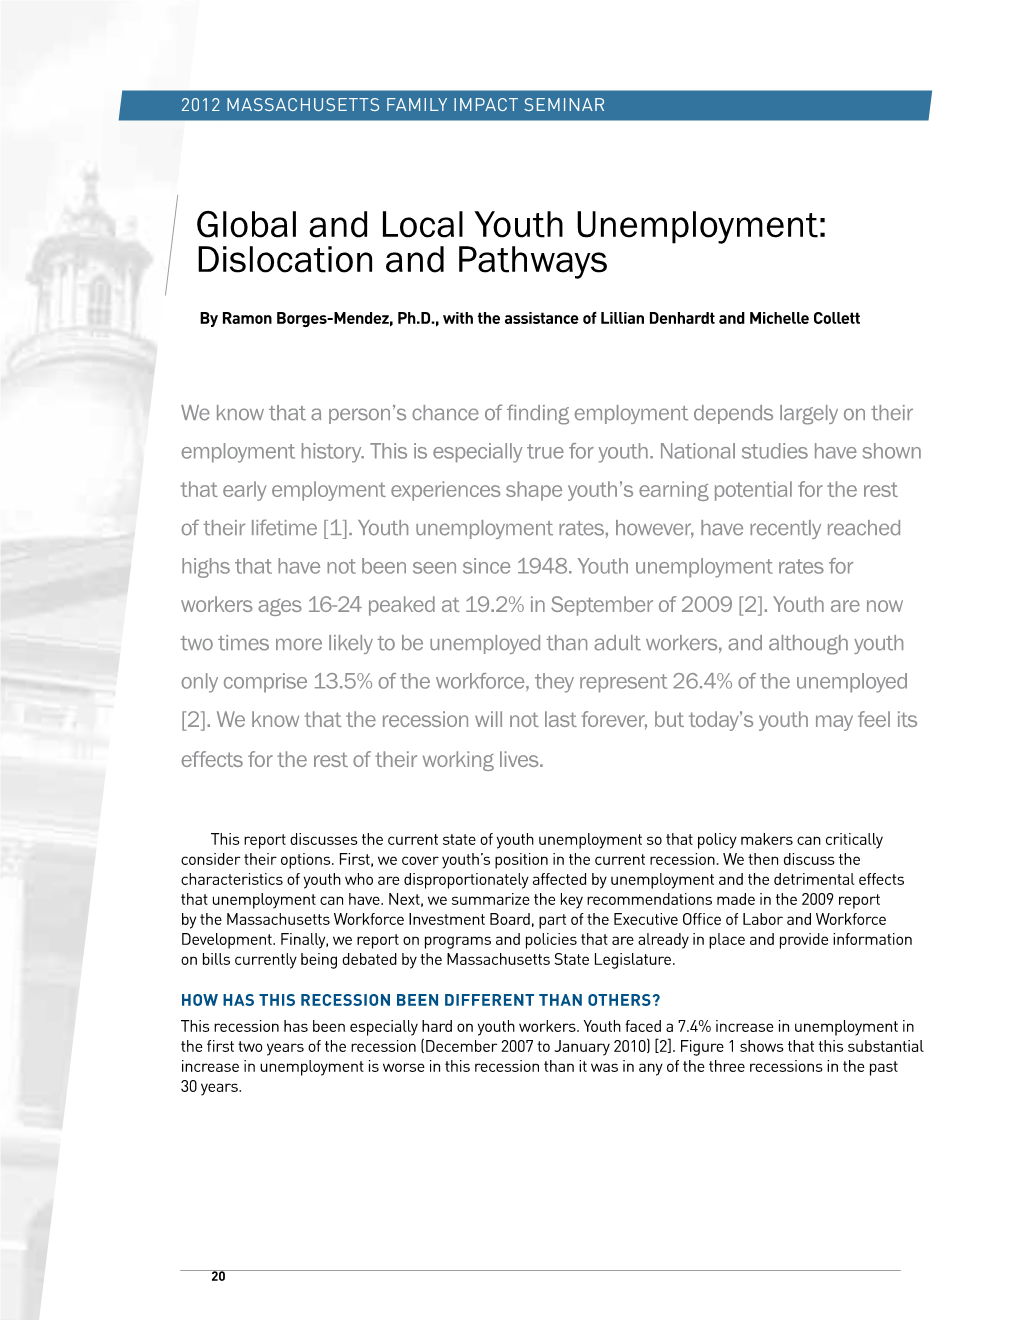 Global and Local Youth Unemployment: Dislocation and Pathways